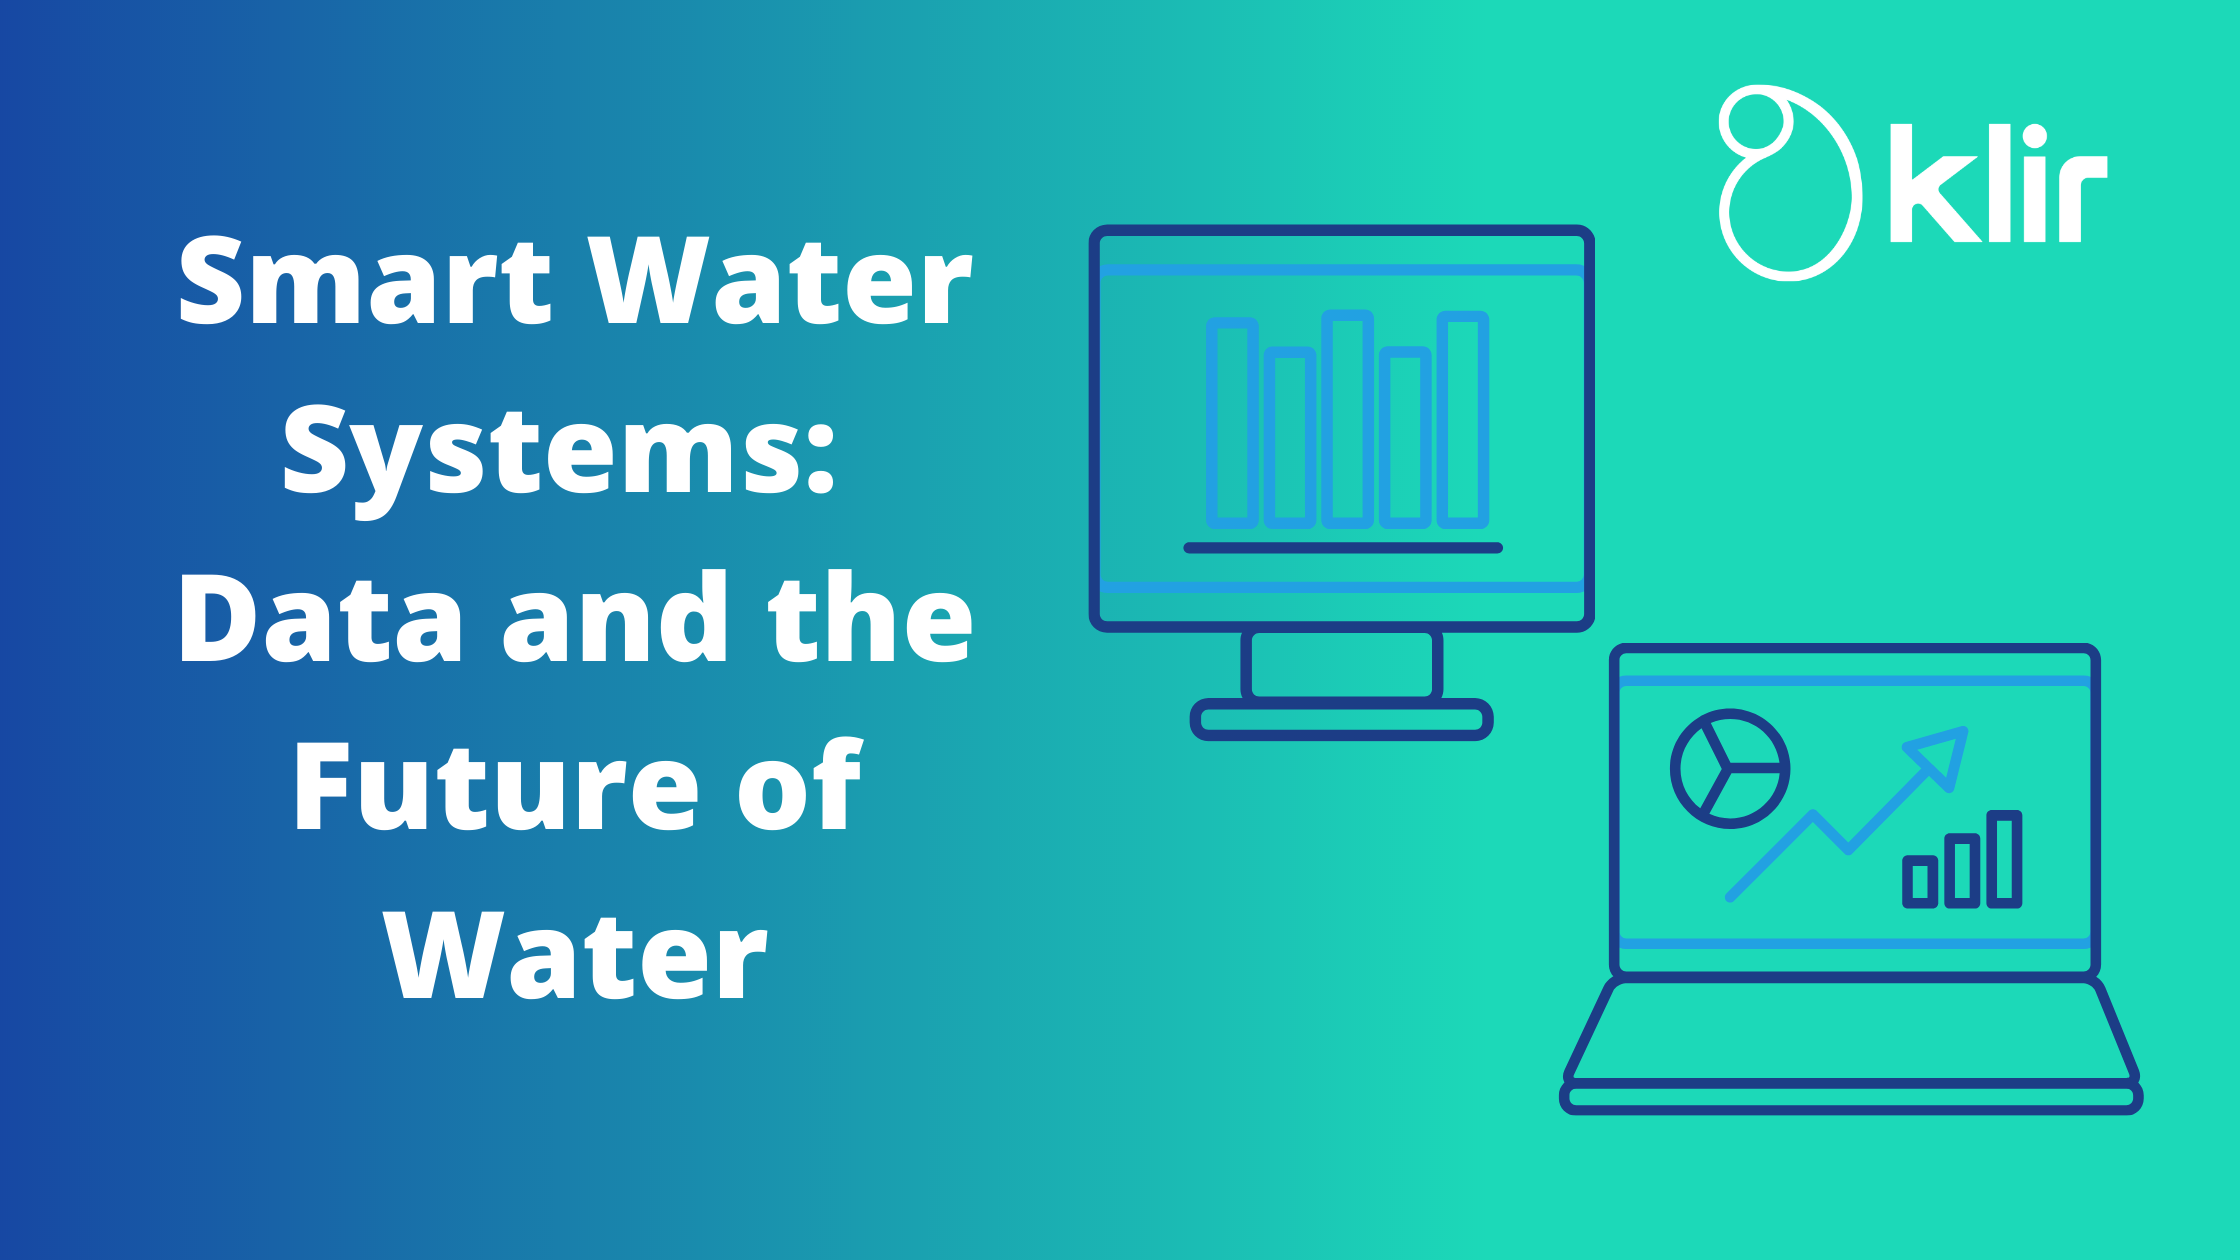 Smart Water Systems: Data and the Future of Water